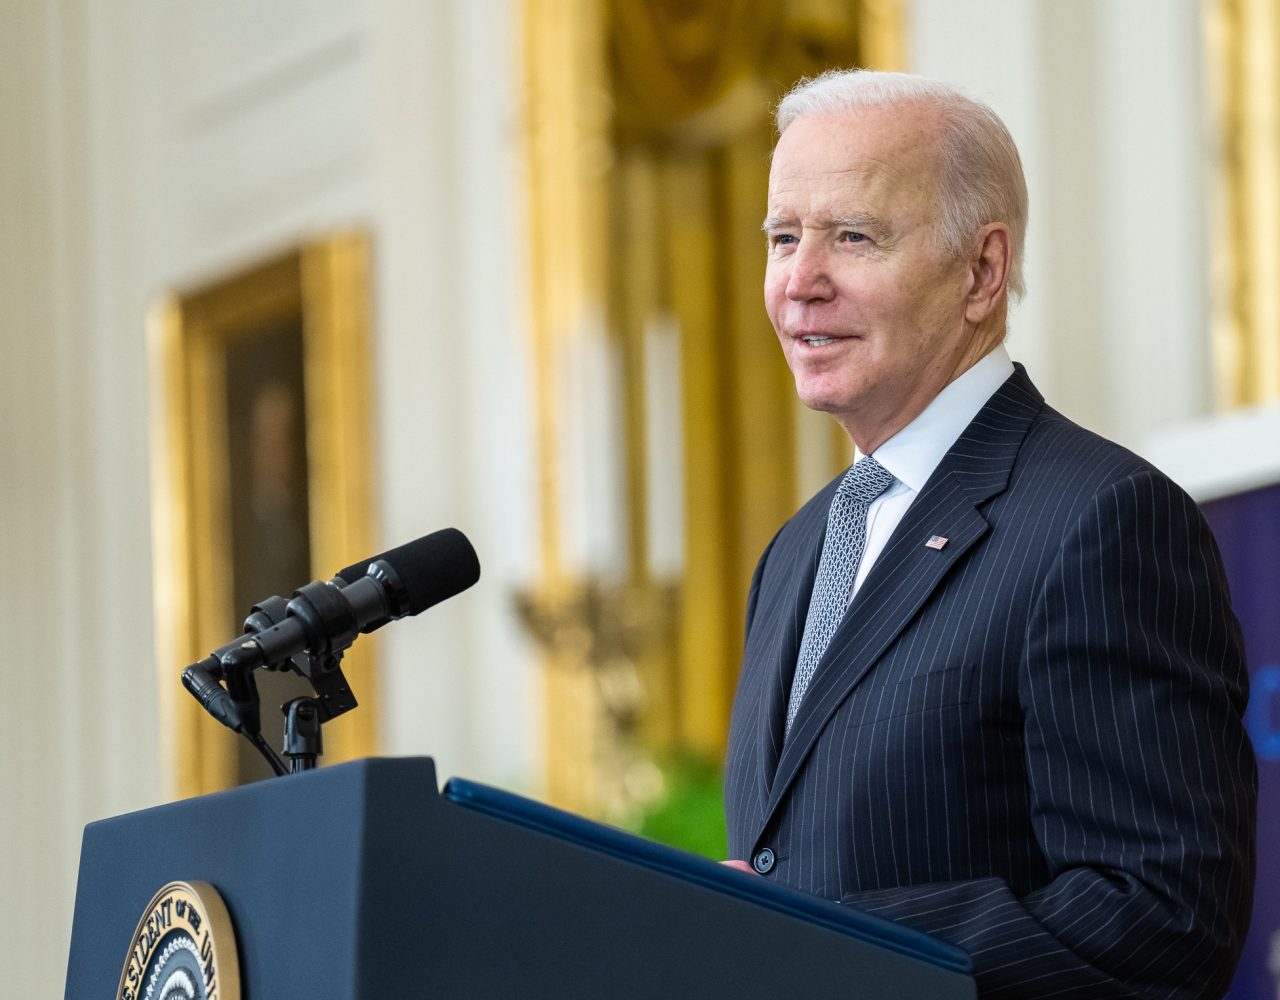 Innovation is essential to achieving our goal of turning more cancers from death sentences to treatable diseases – President Biden